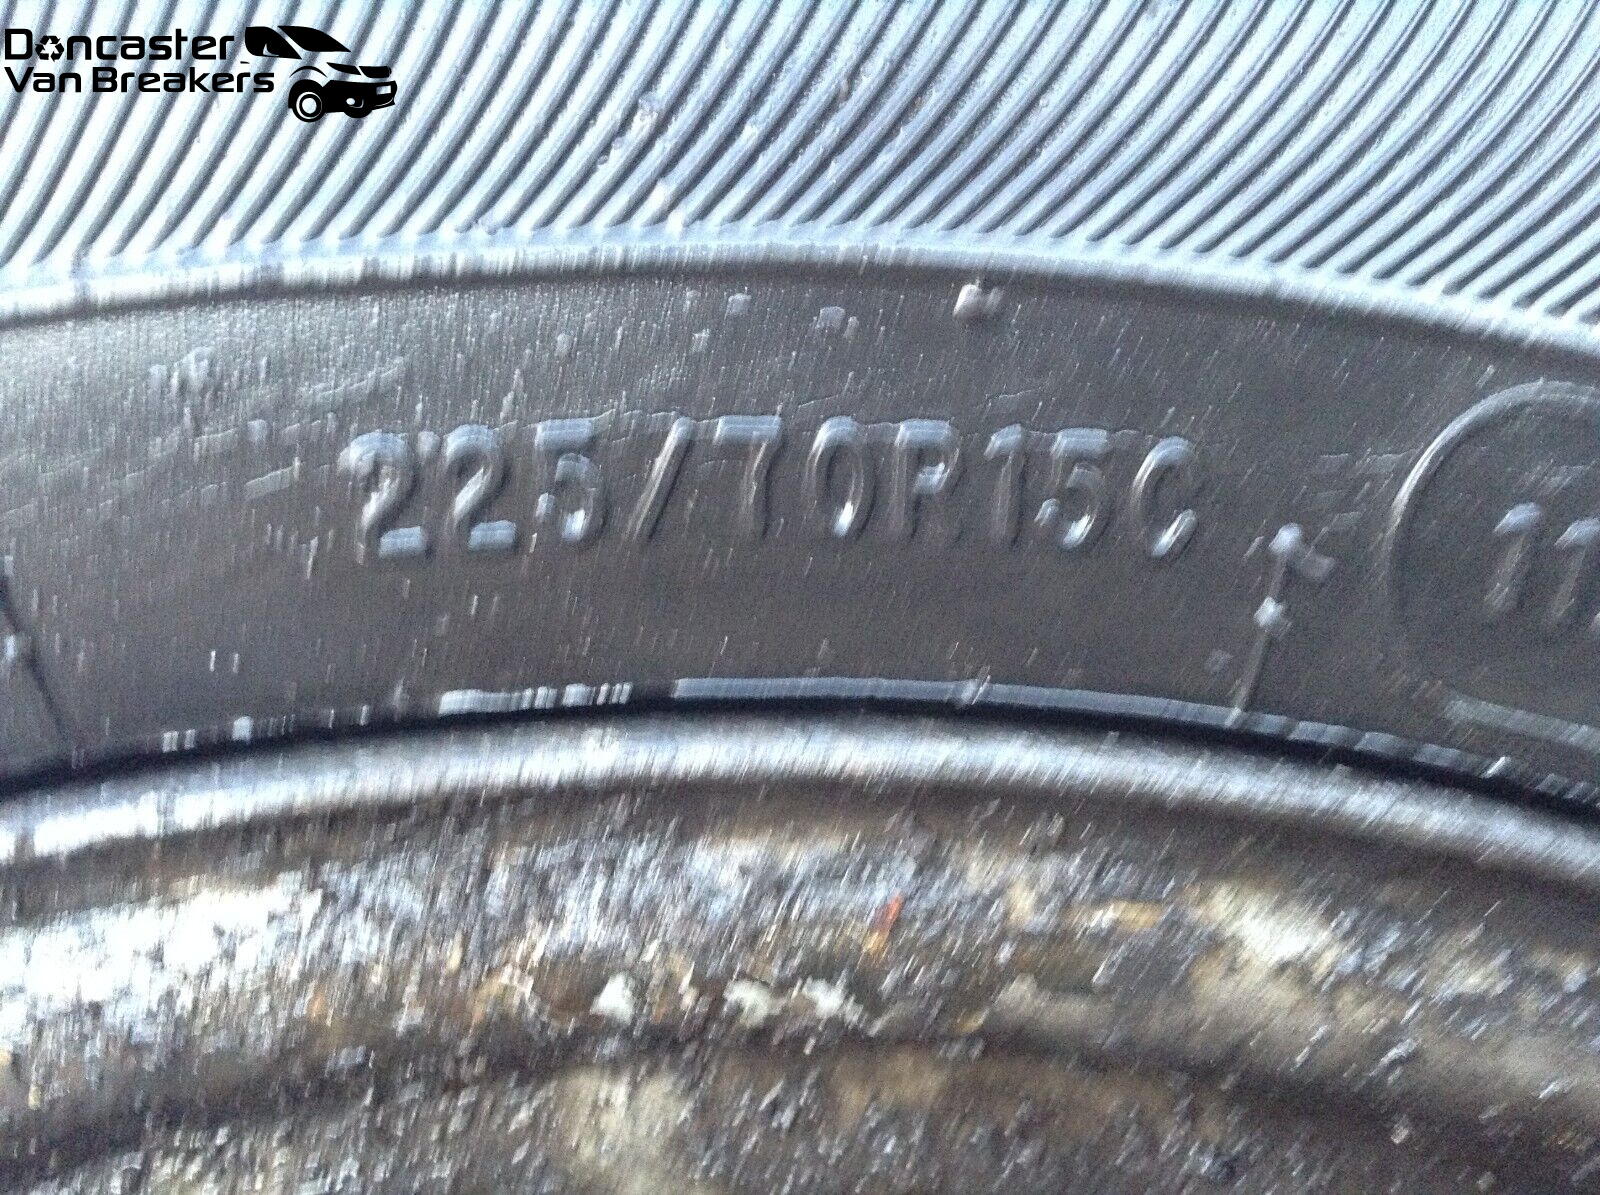 IVECO DAILY 2005 35512 STEEL WHEEL AND TYRE 225/70/15 5STUD 10MM TREAD